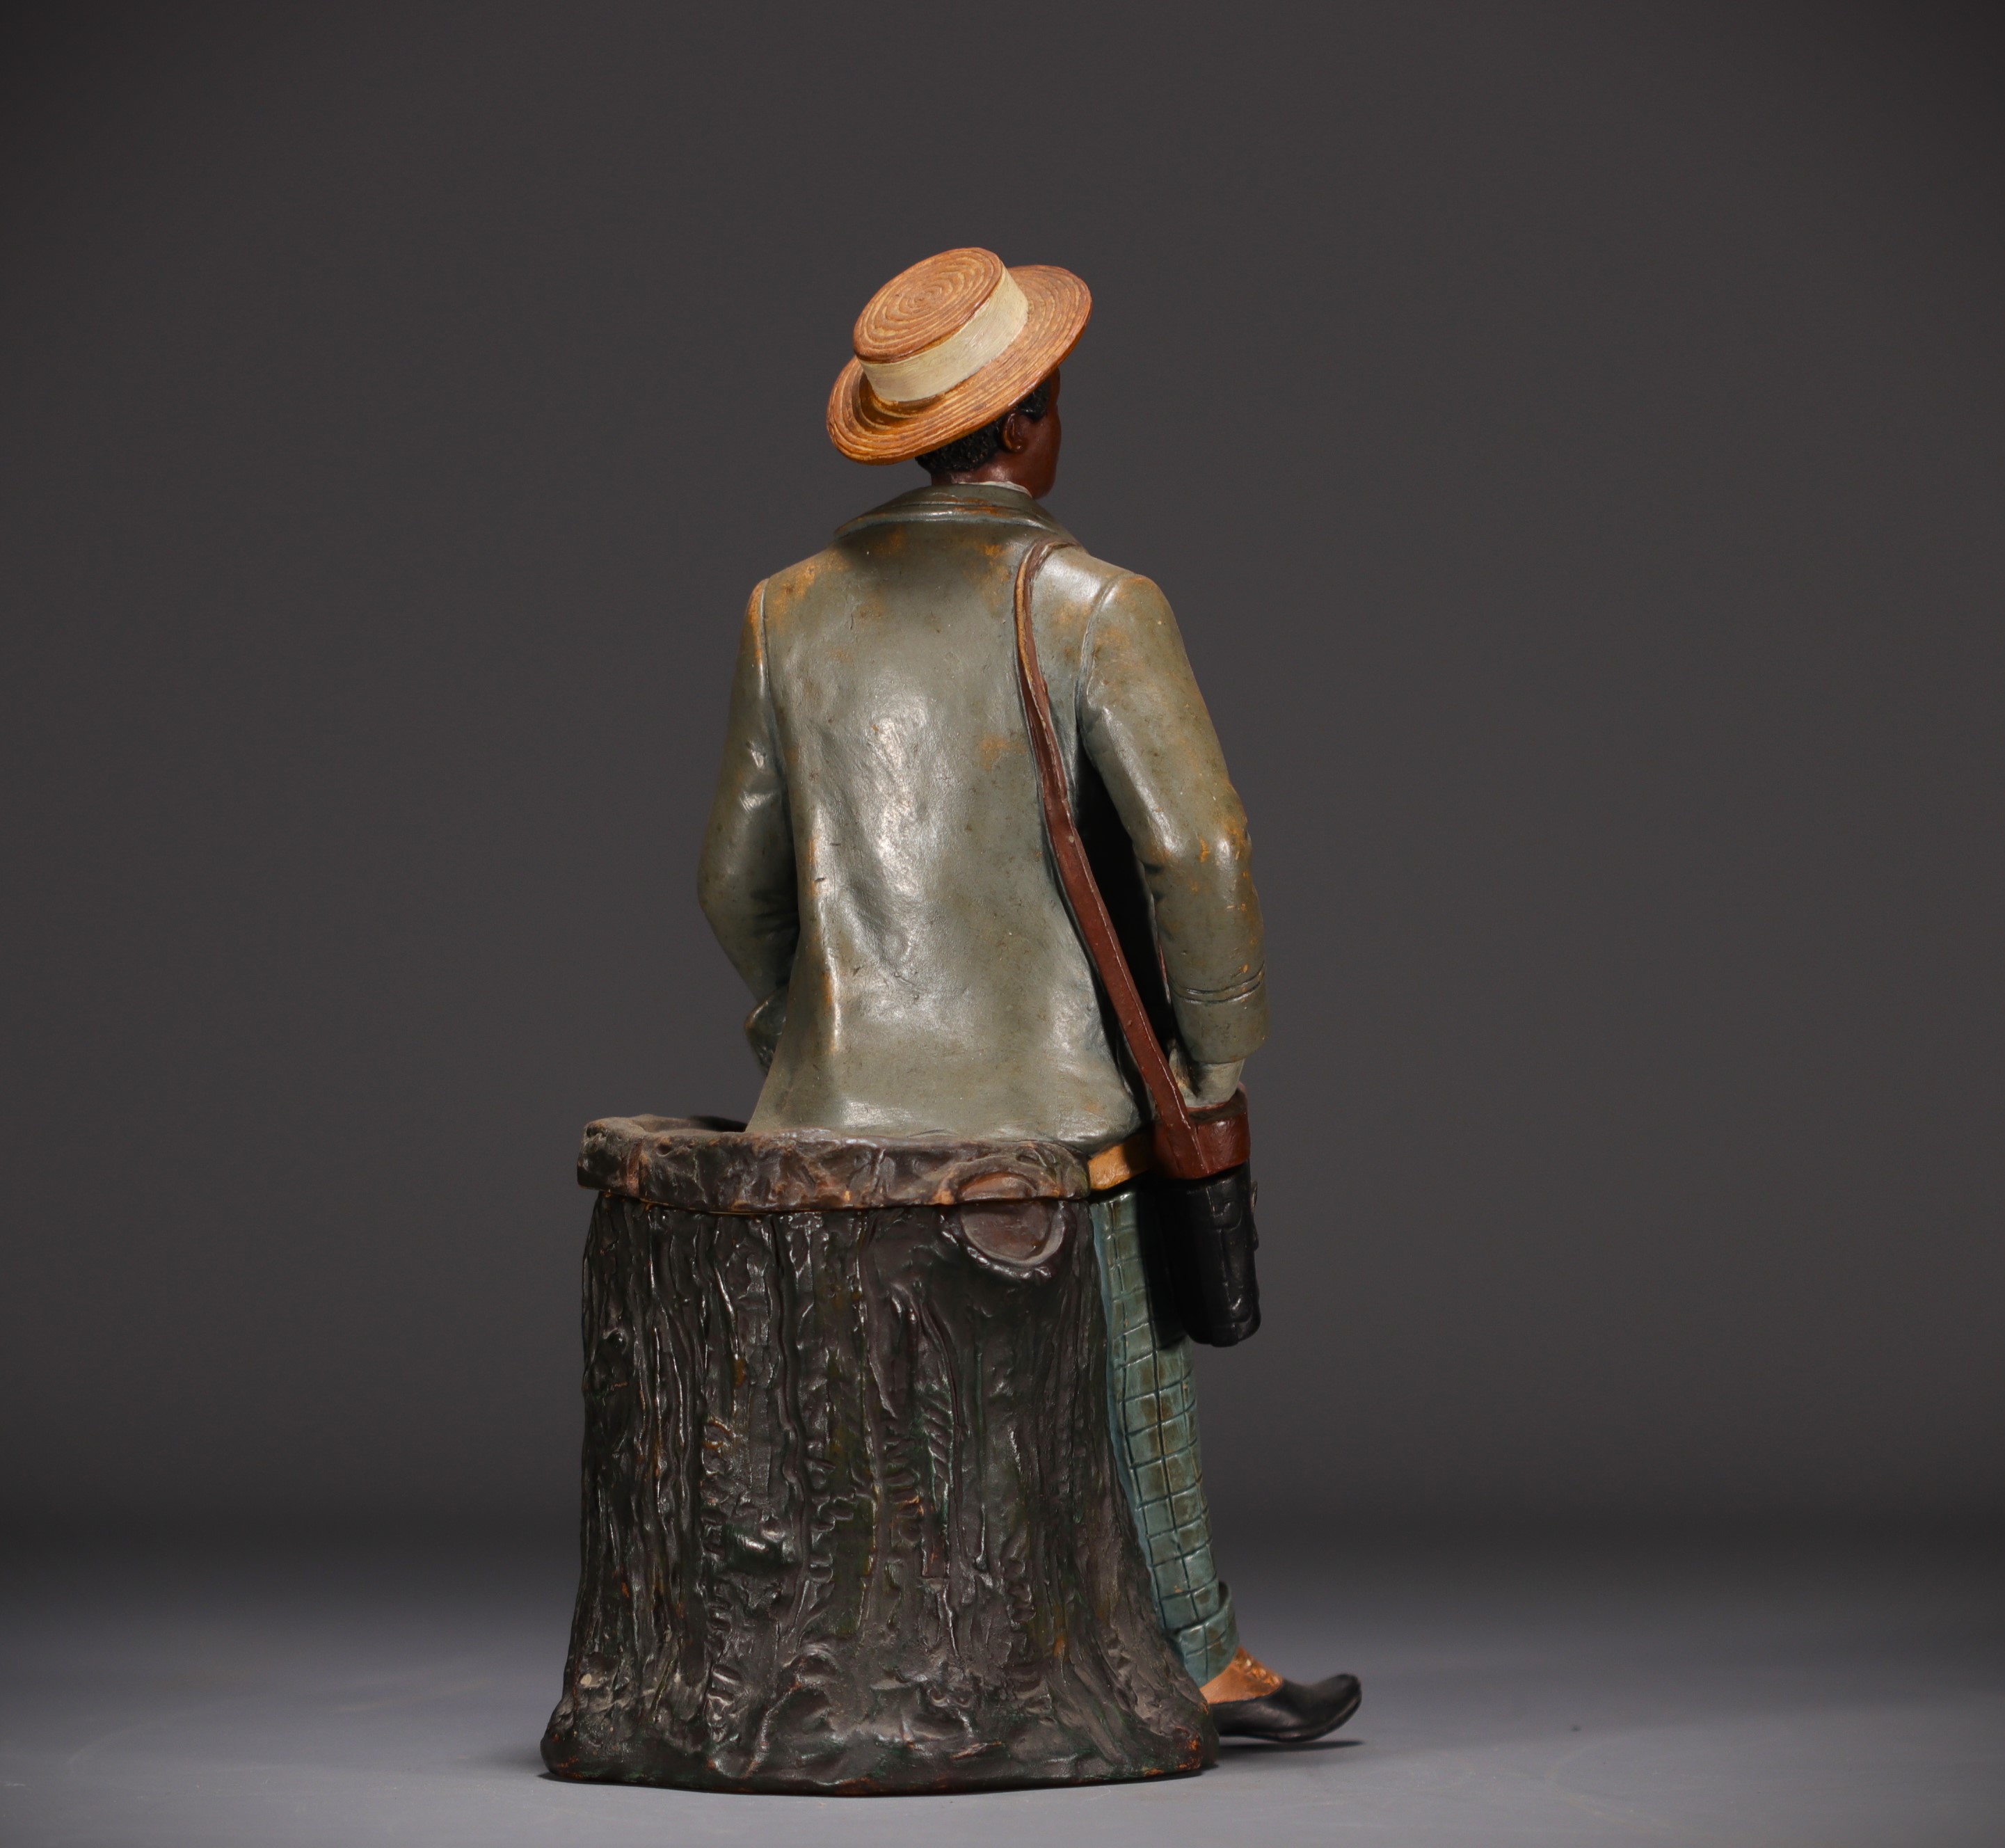 Bernard BLOCH (1836-1909) "African dandy with monocle" Polychrome terracotta tobacco pot. - Image 4 of 5